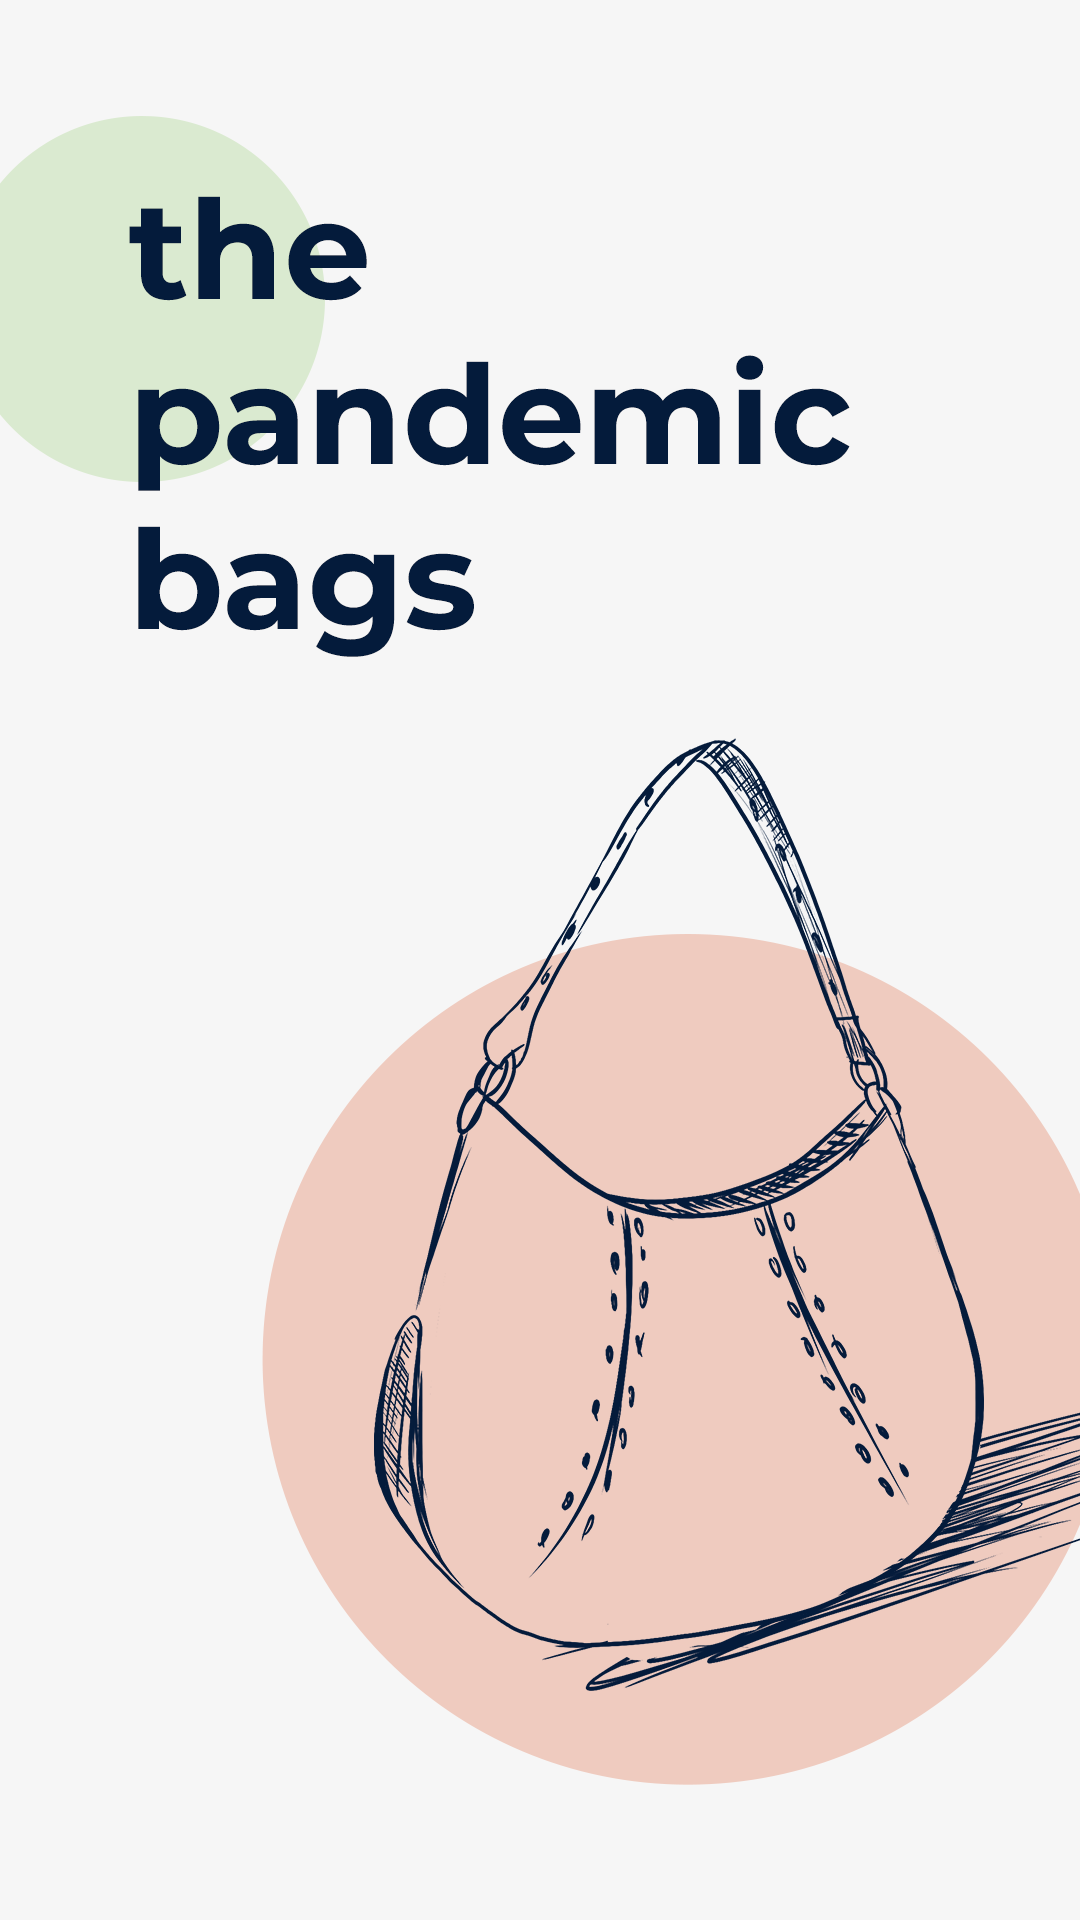 The pandemic bags